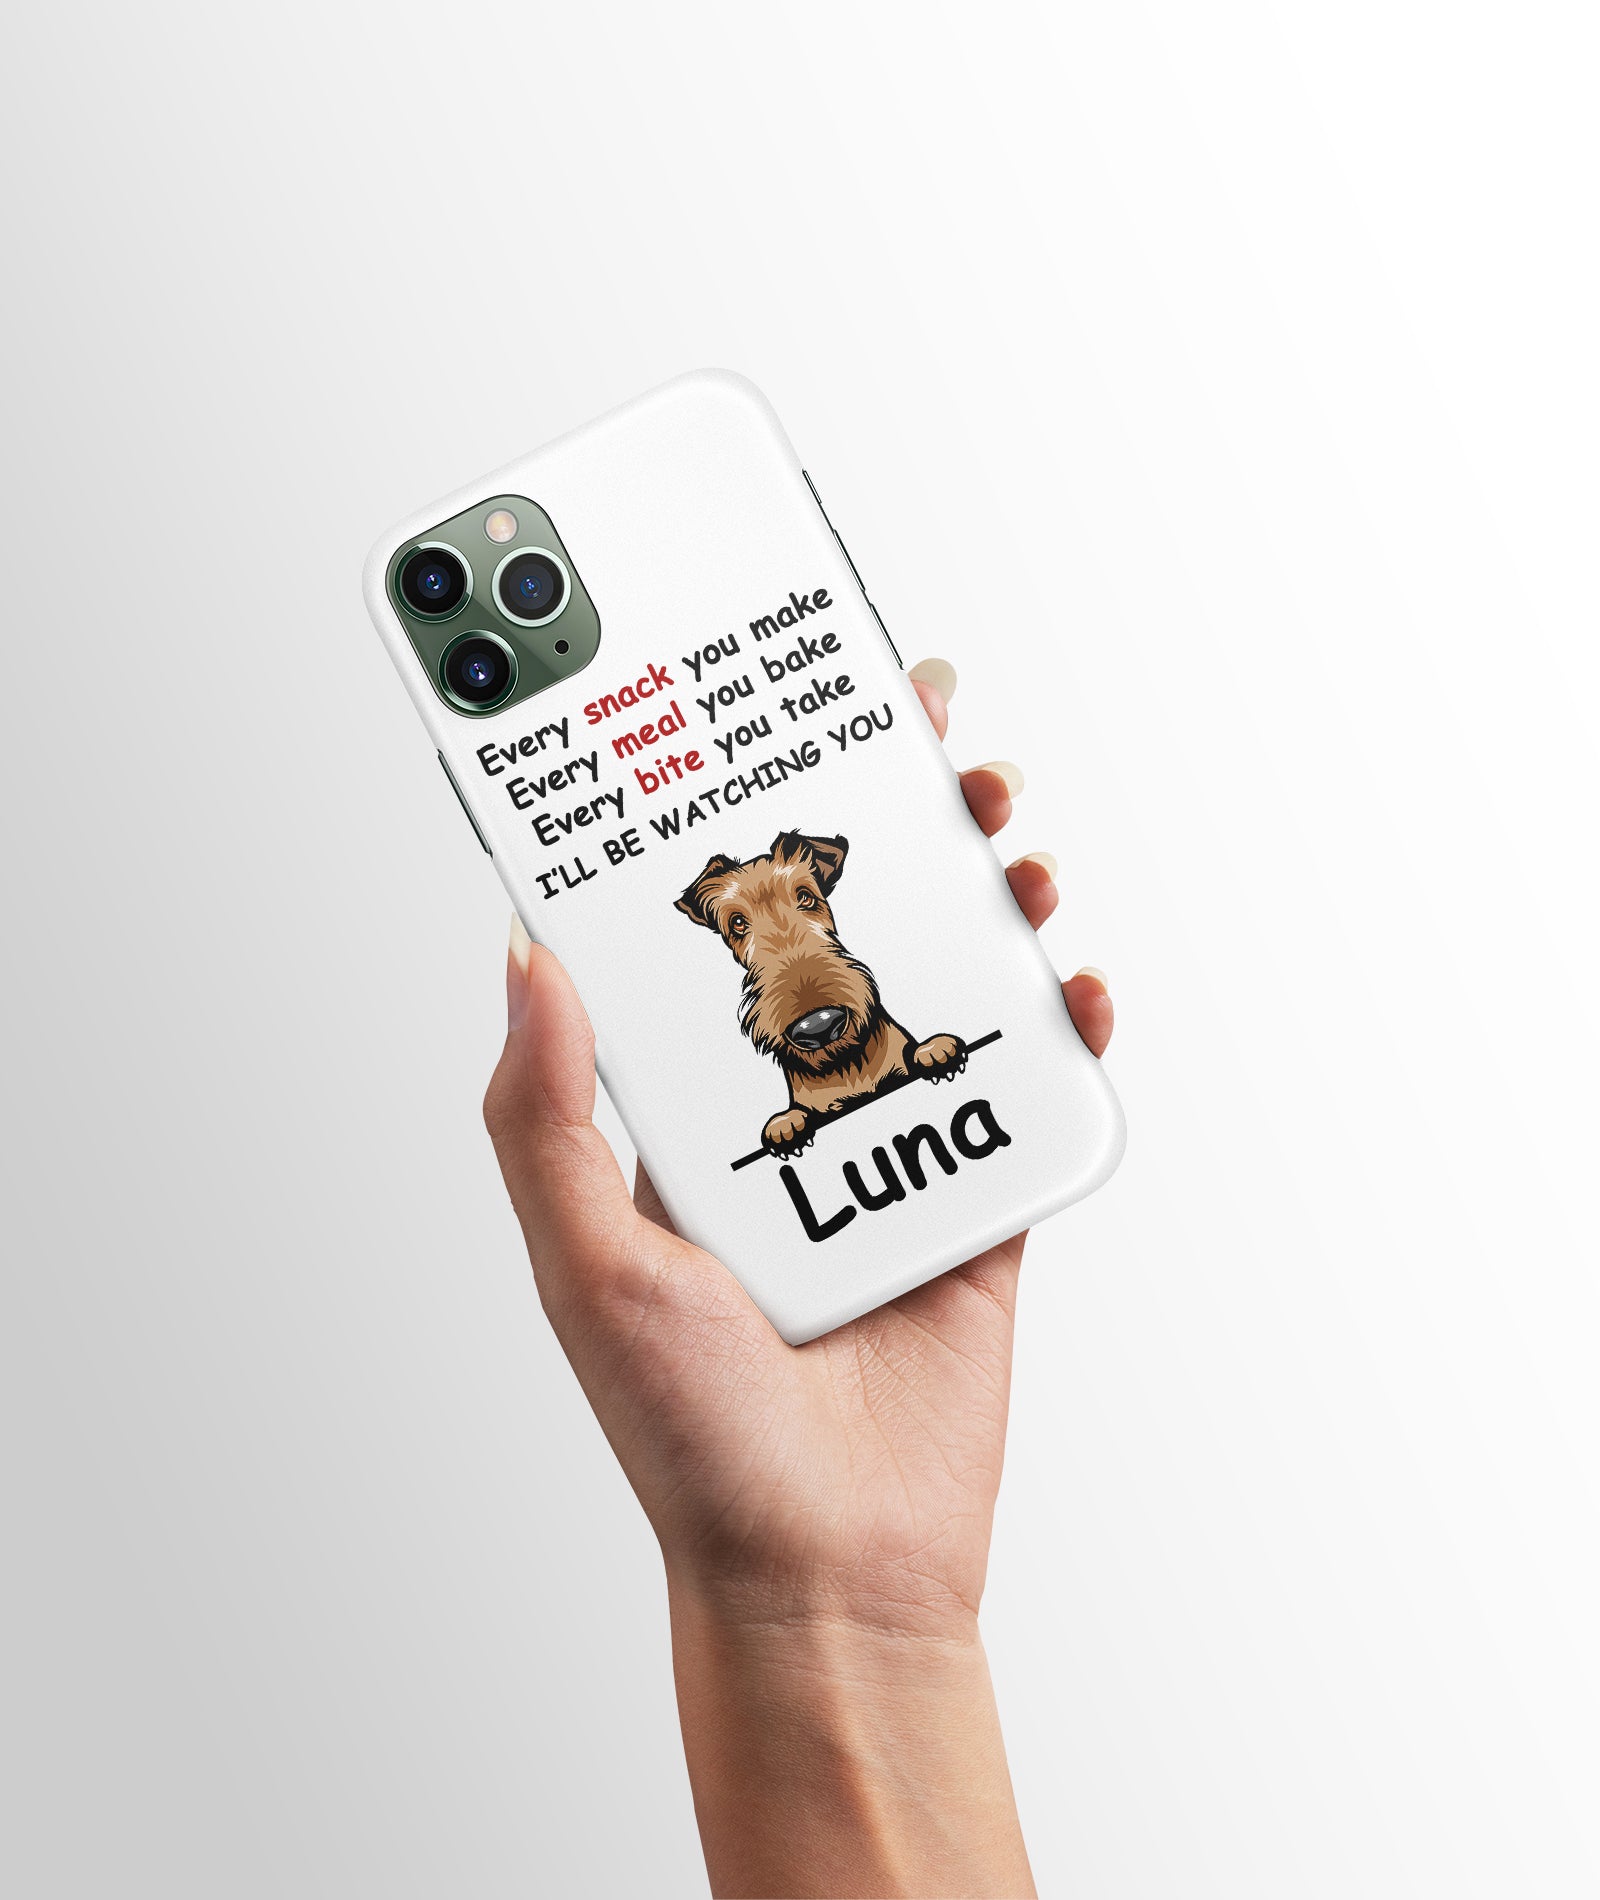 Every Snack You Make, Funny Phone Case, Personalized Gifts for Dog Lovers